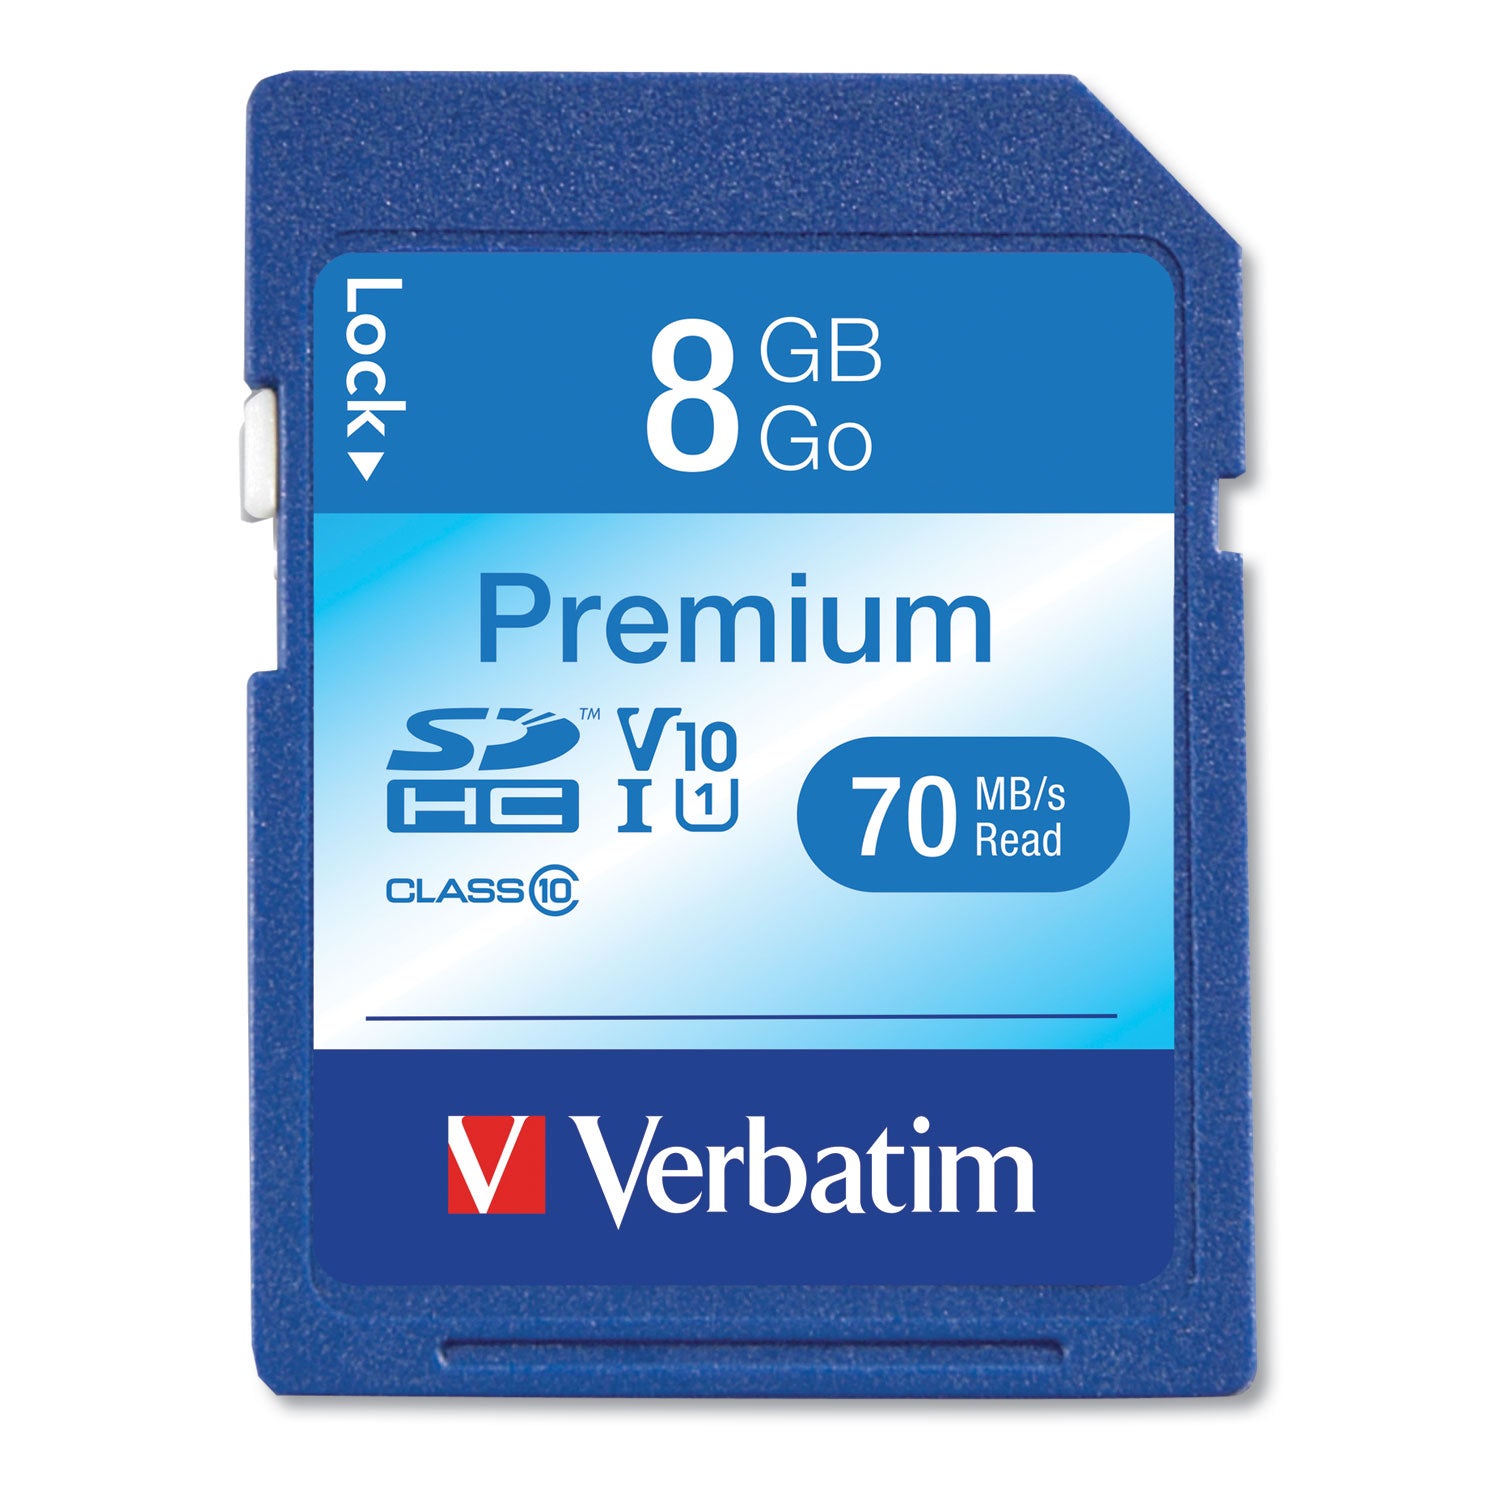 8GB Premium SDHC Memory Card, UHS-1 V10 U1 Class 10, Up to 70MB/s Read Speed - 